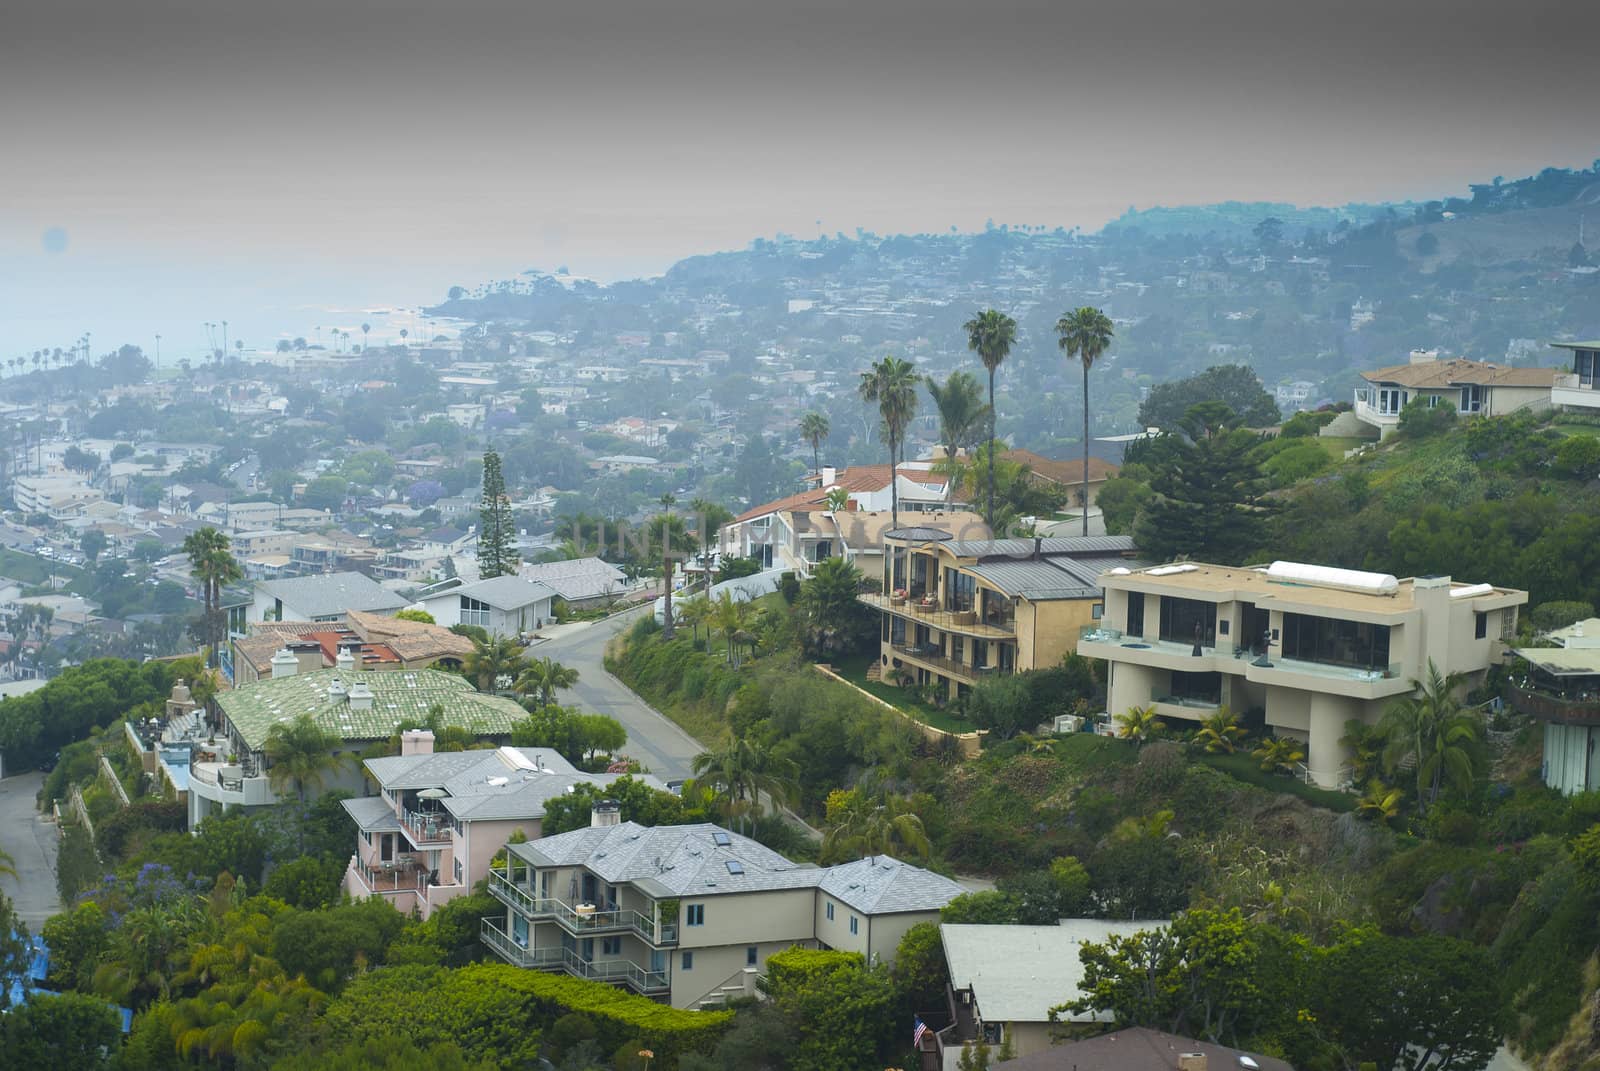 Looking down to Laguna Beach with big houses stacked on hill